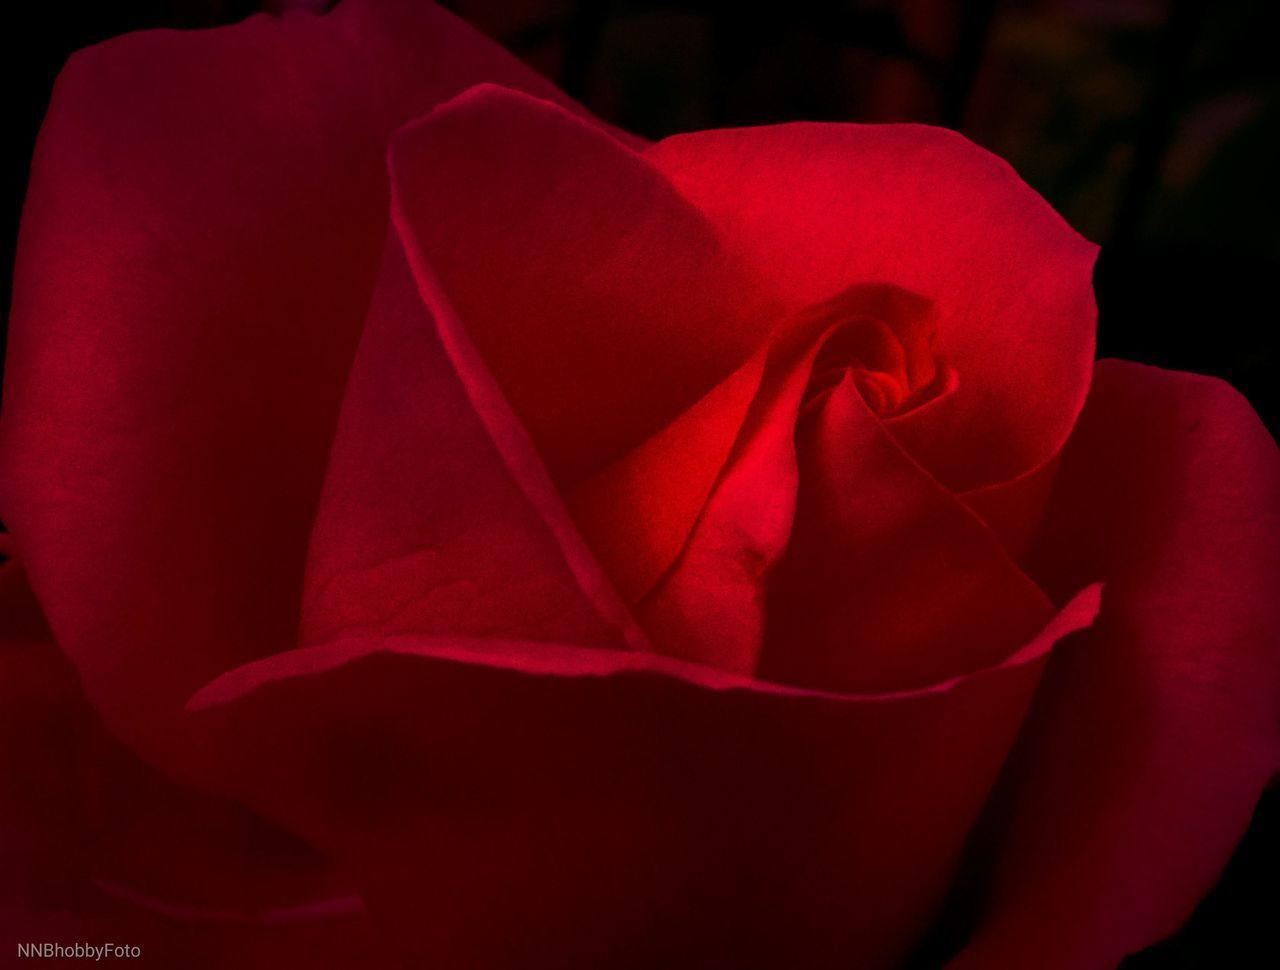 CLOSE-UP OF RED ROSE IN BLACK